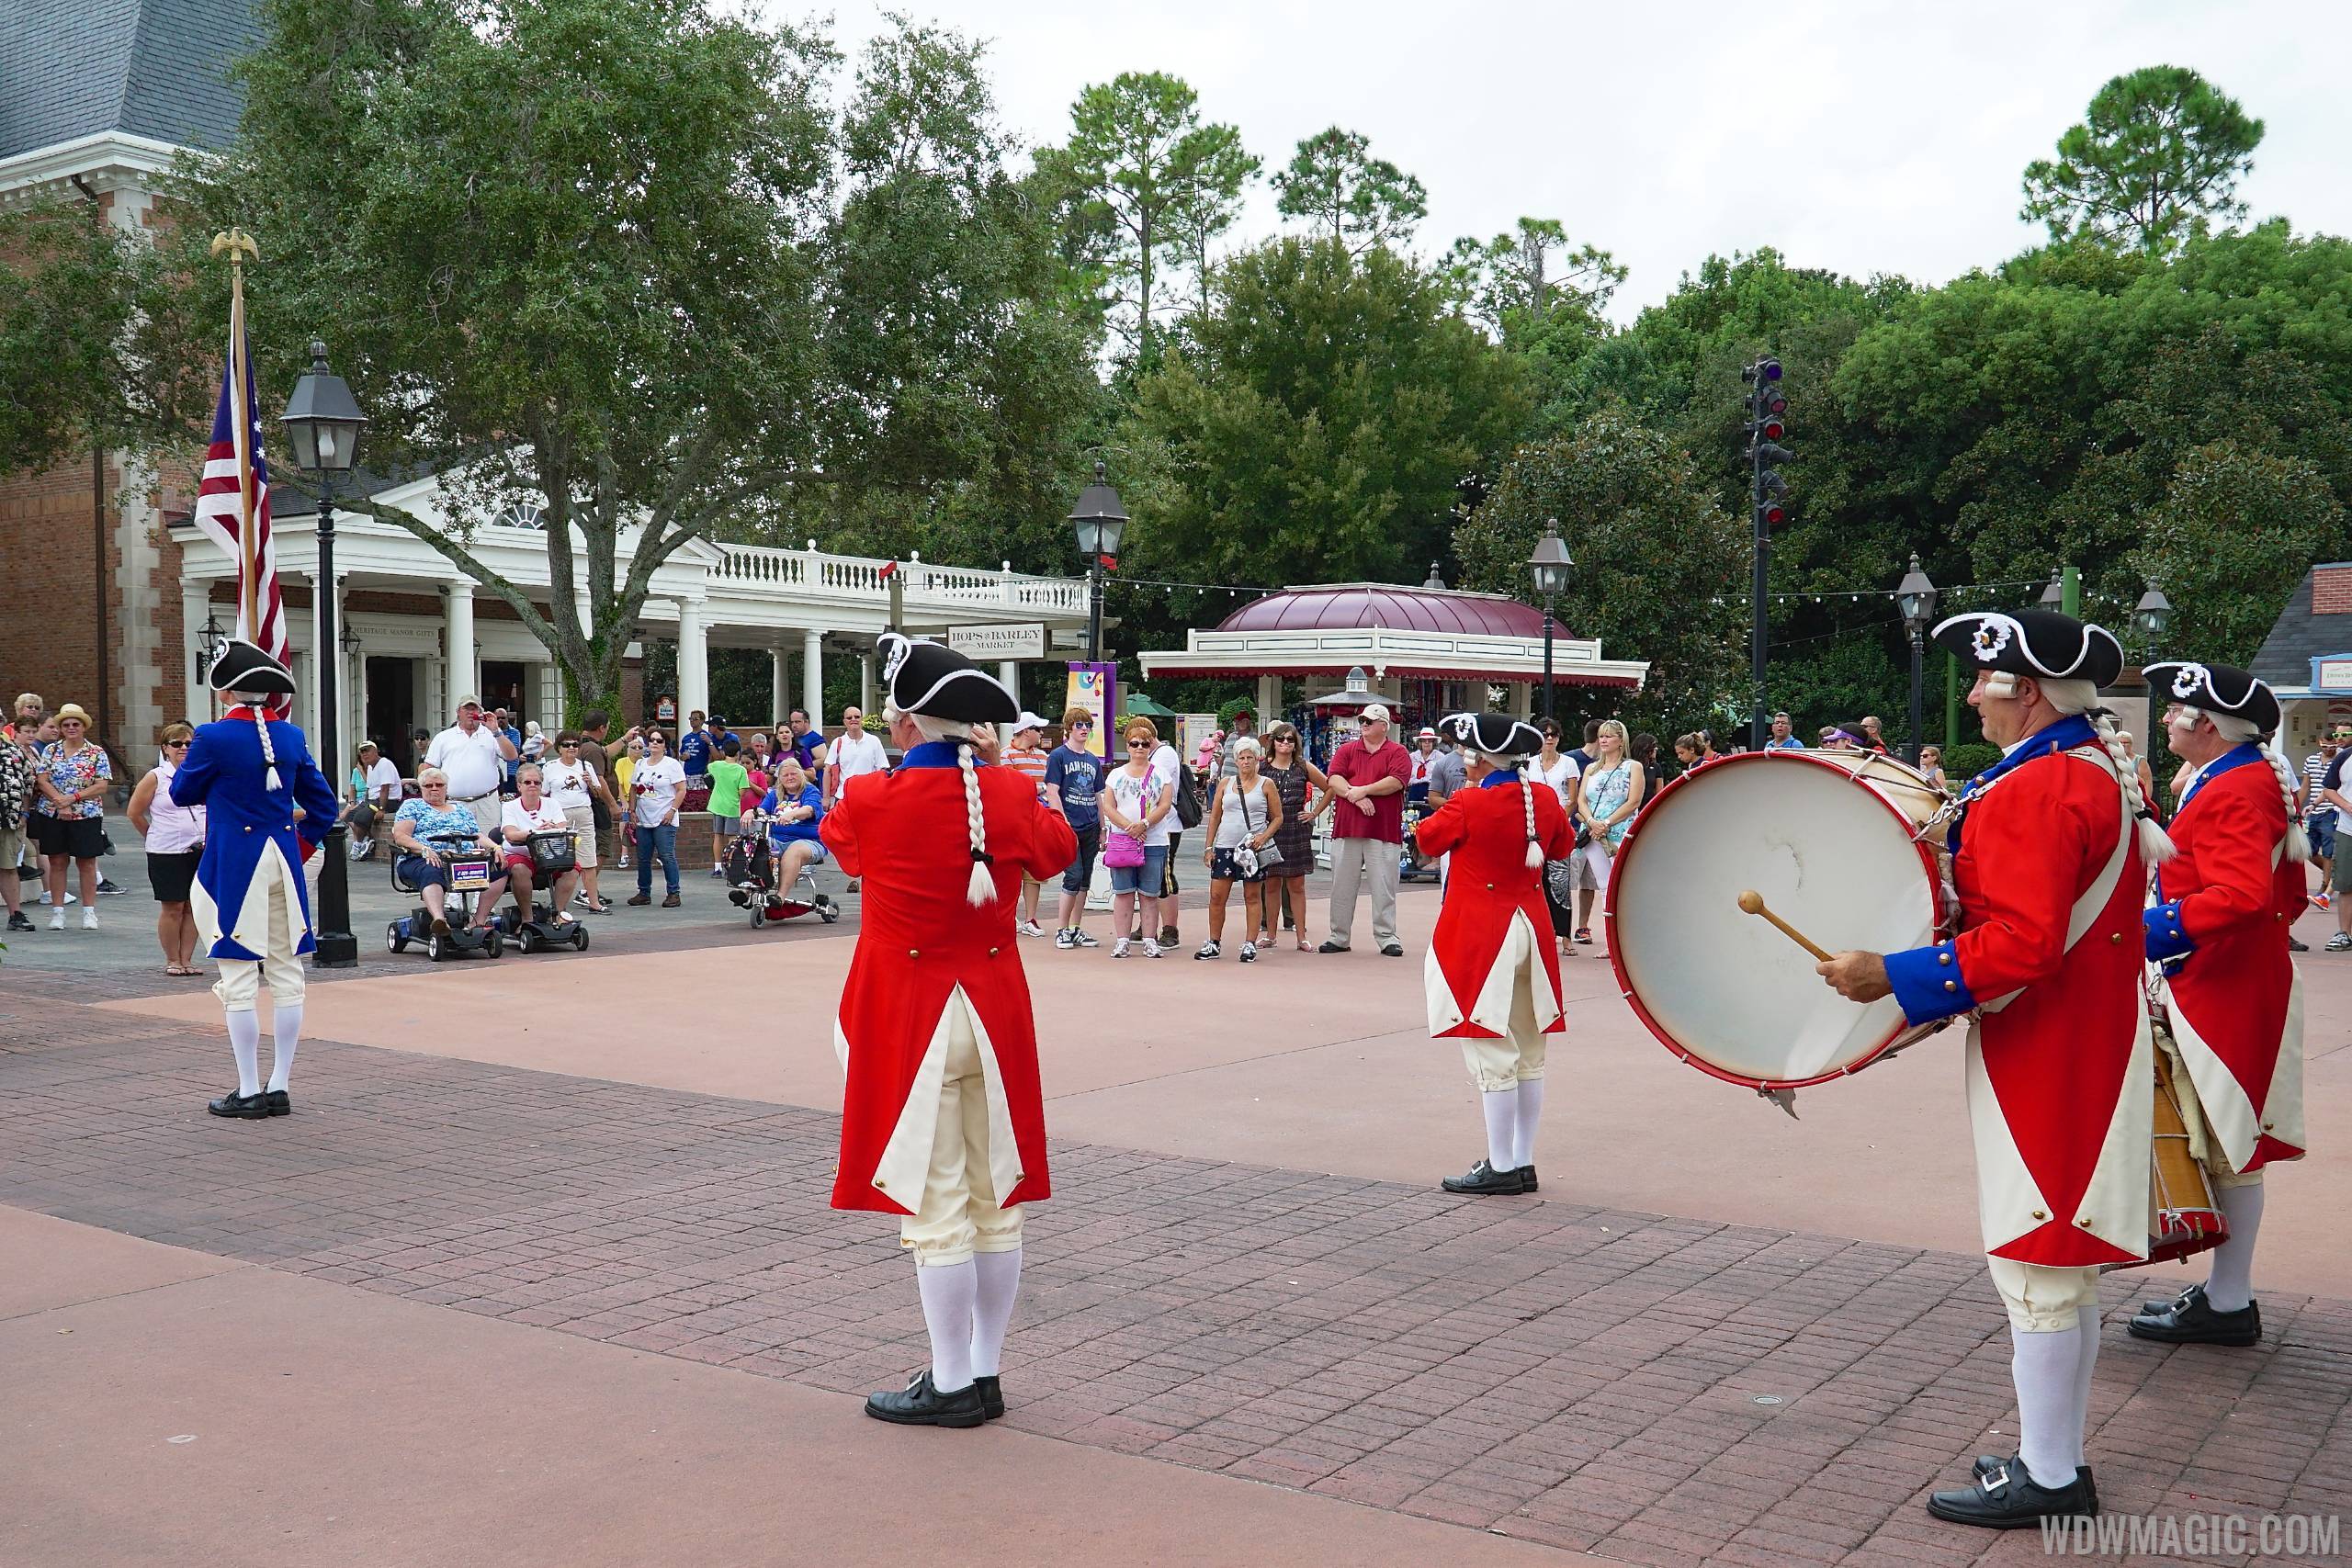 VIDEO - The Spirit of America Fife and Drum Corps final performance at Epcot's American Adventure pavilion